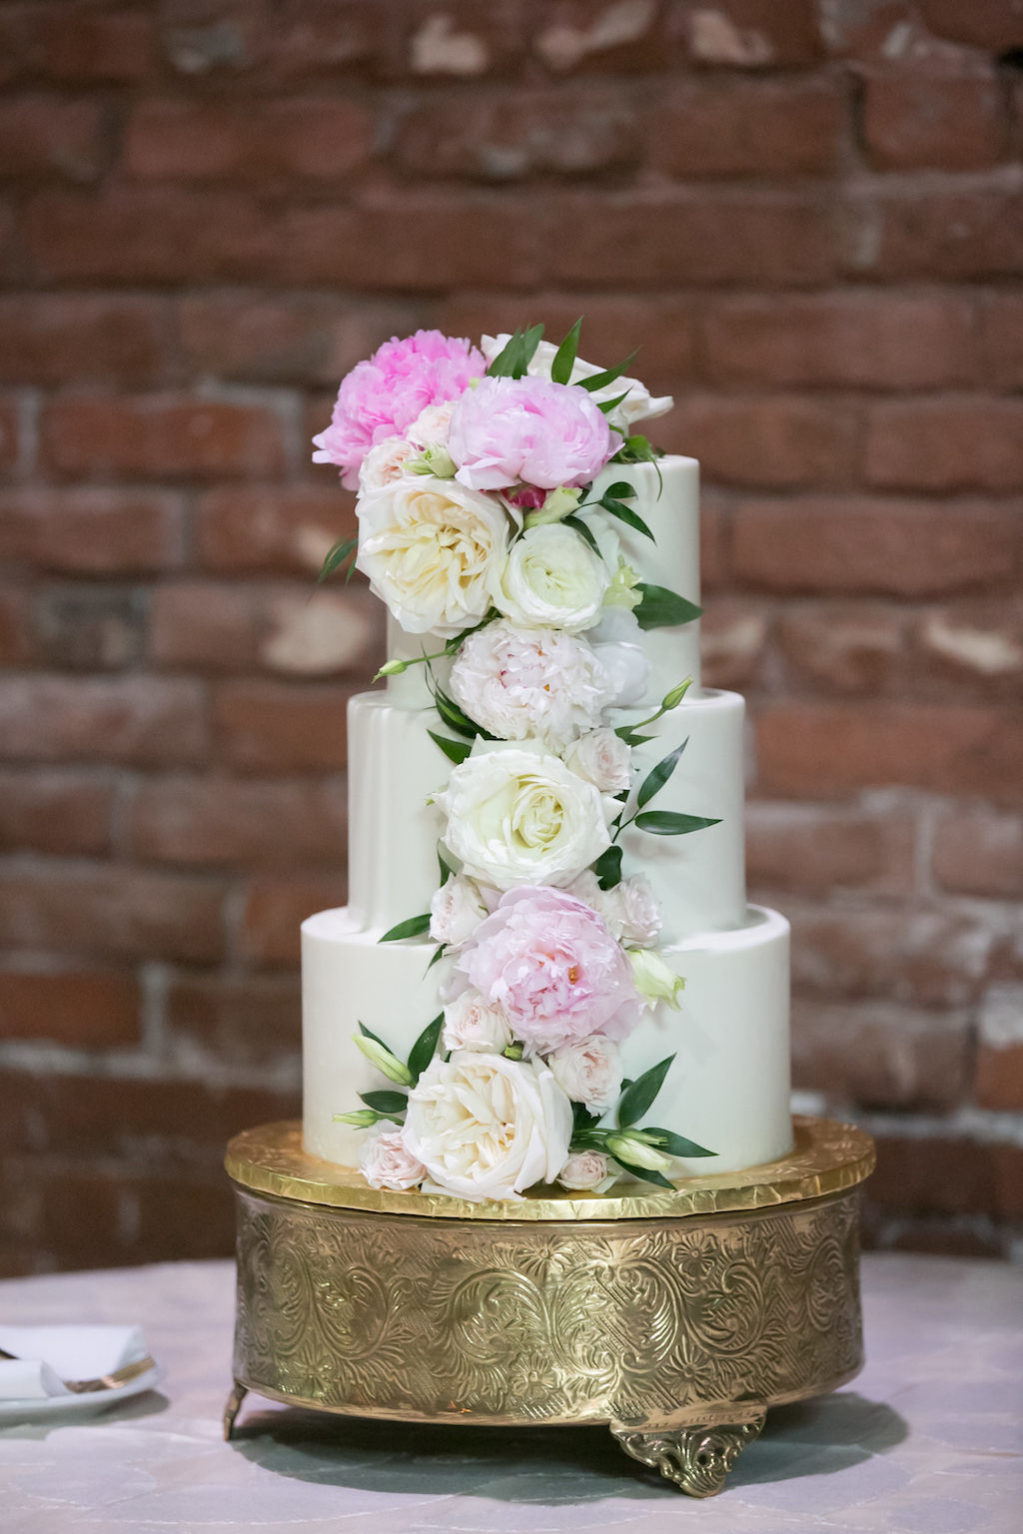 Classic Modern White Three Tier Round Wedding Cake with Ivory, Pink Real Cascading Flowers on Antique Gold Cake Stand | Tampa Bay Wedding Photographer Carrie Wildes Photography | Tampa Bay Wedding Cake Bakery The Artistic Whisk